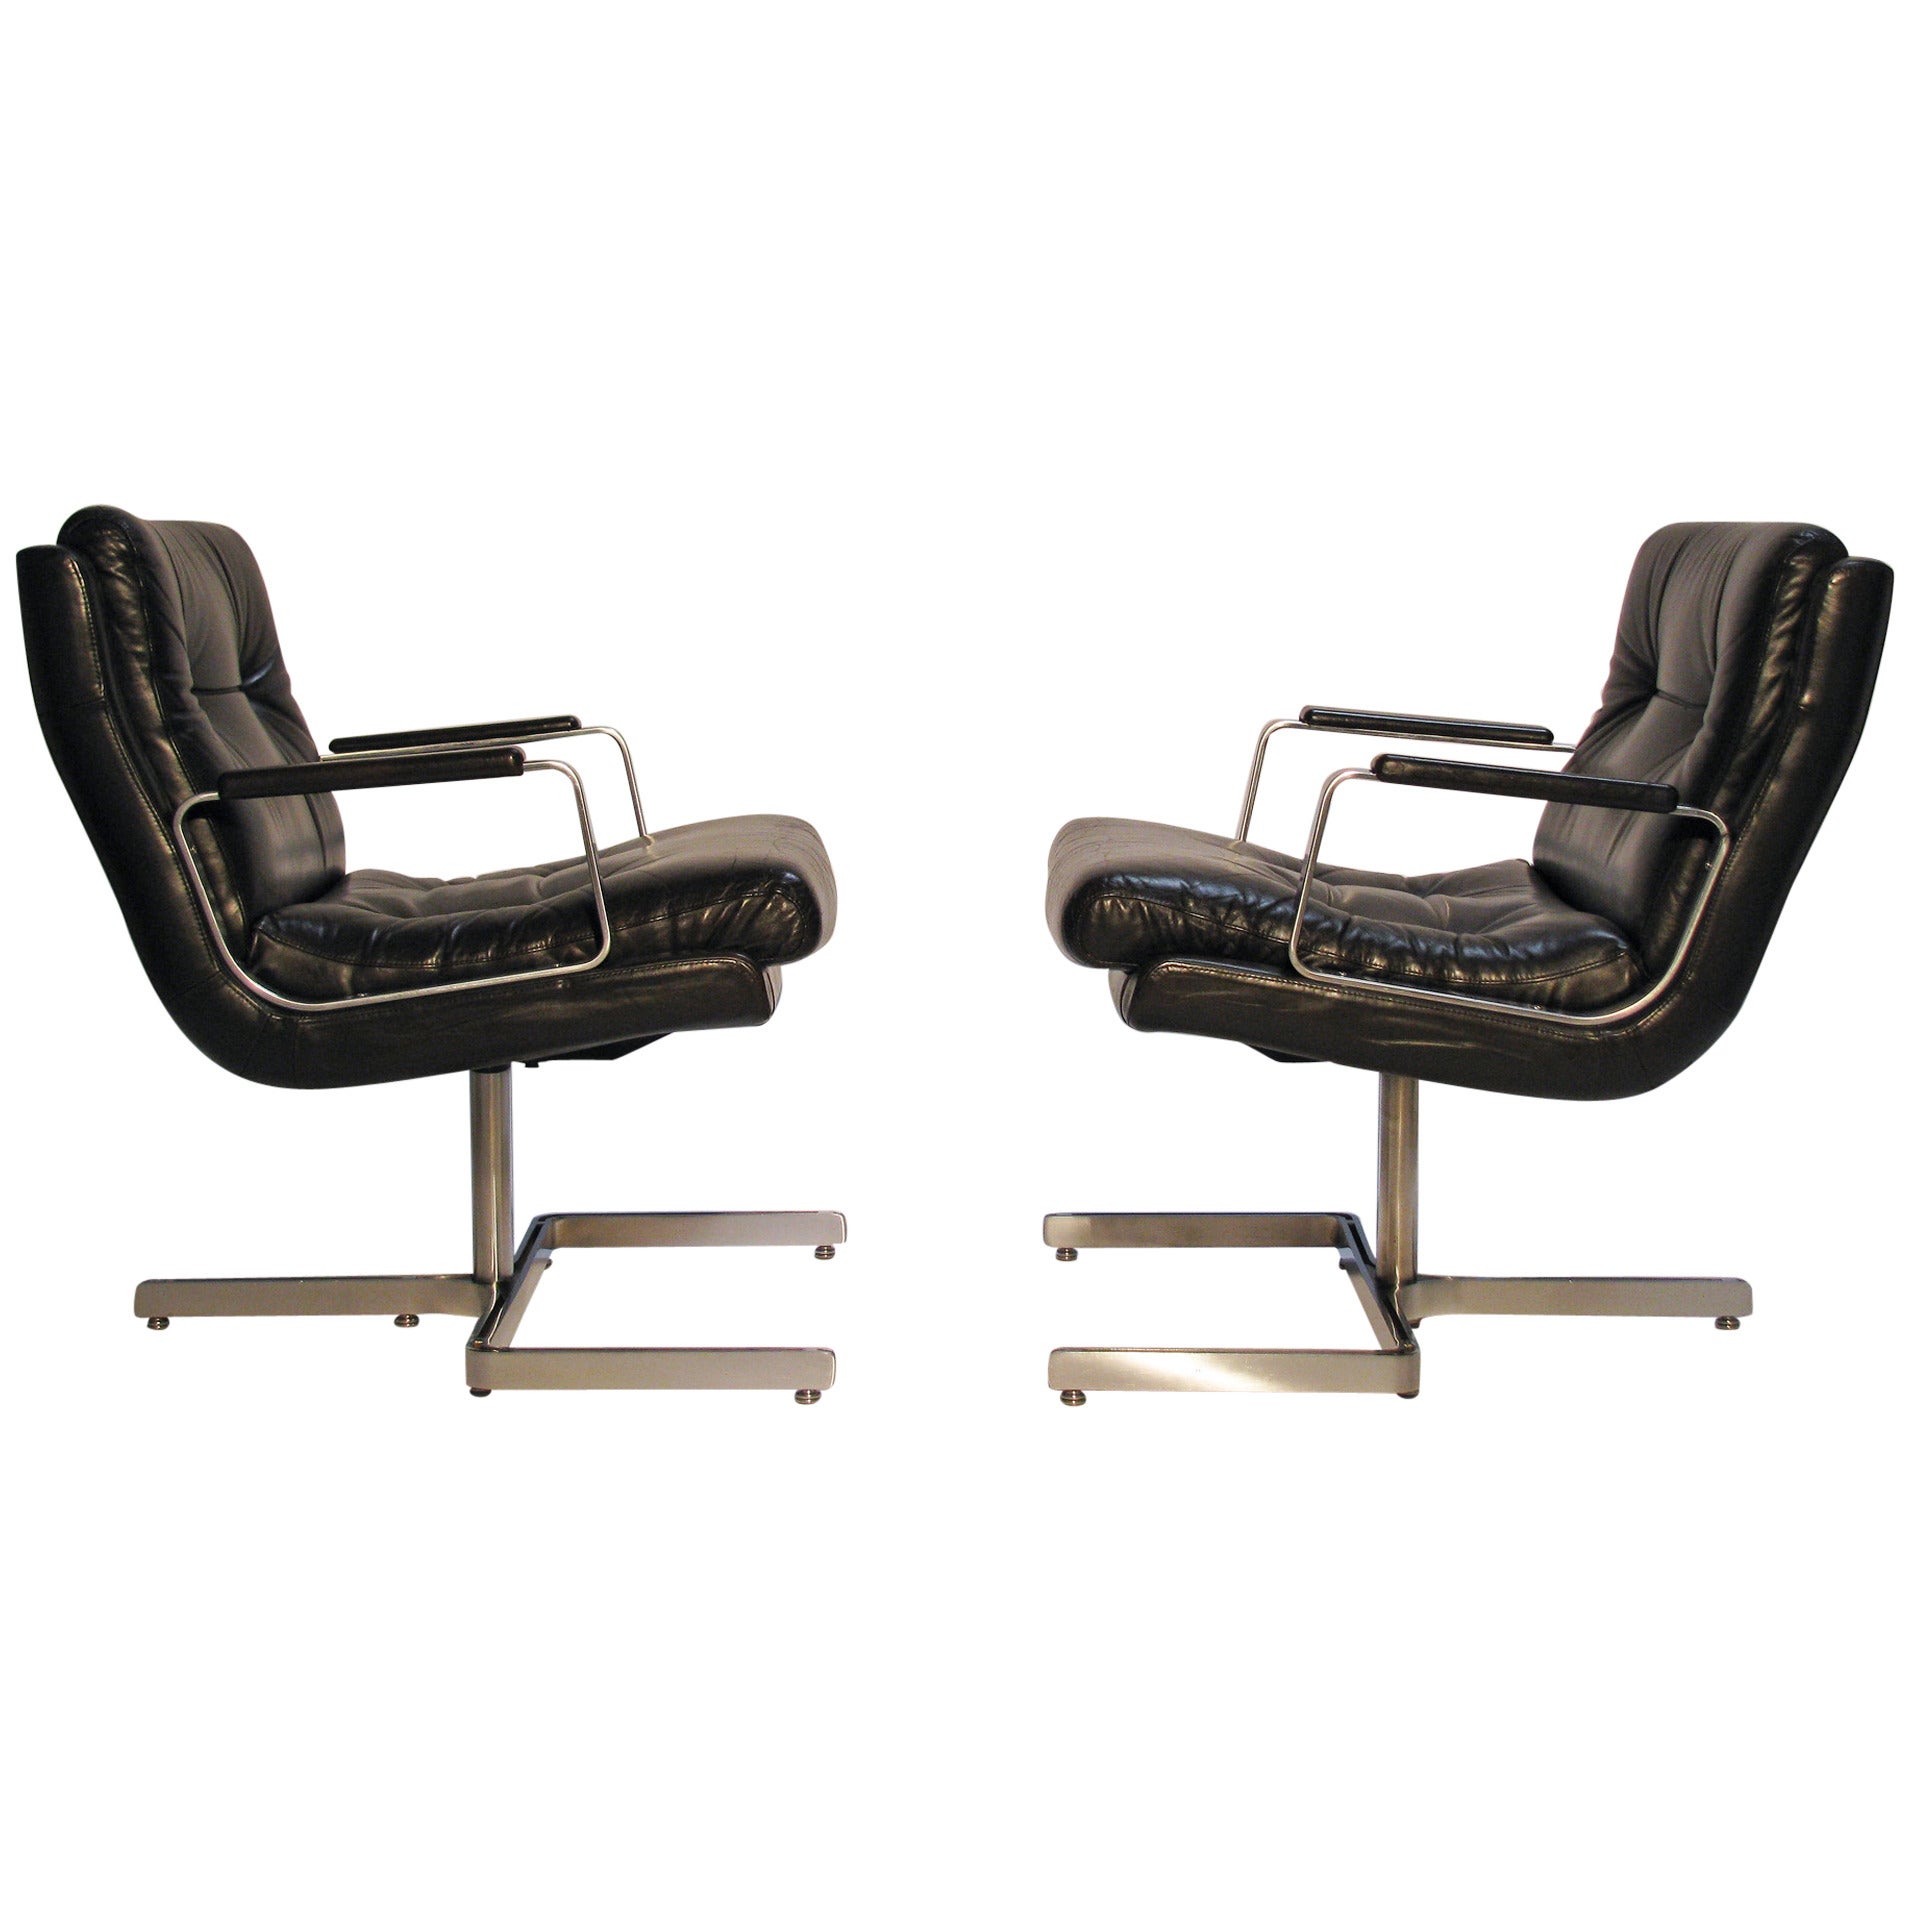 Pair of Leather Lounge Chairs by Raphael For Sale